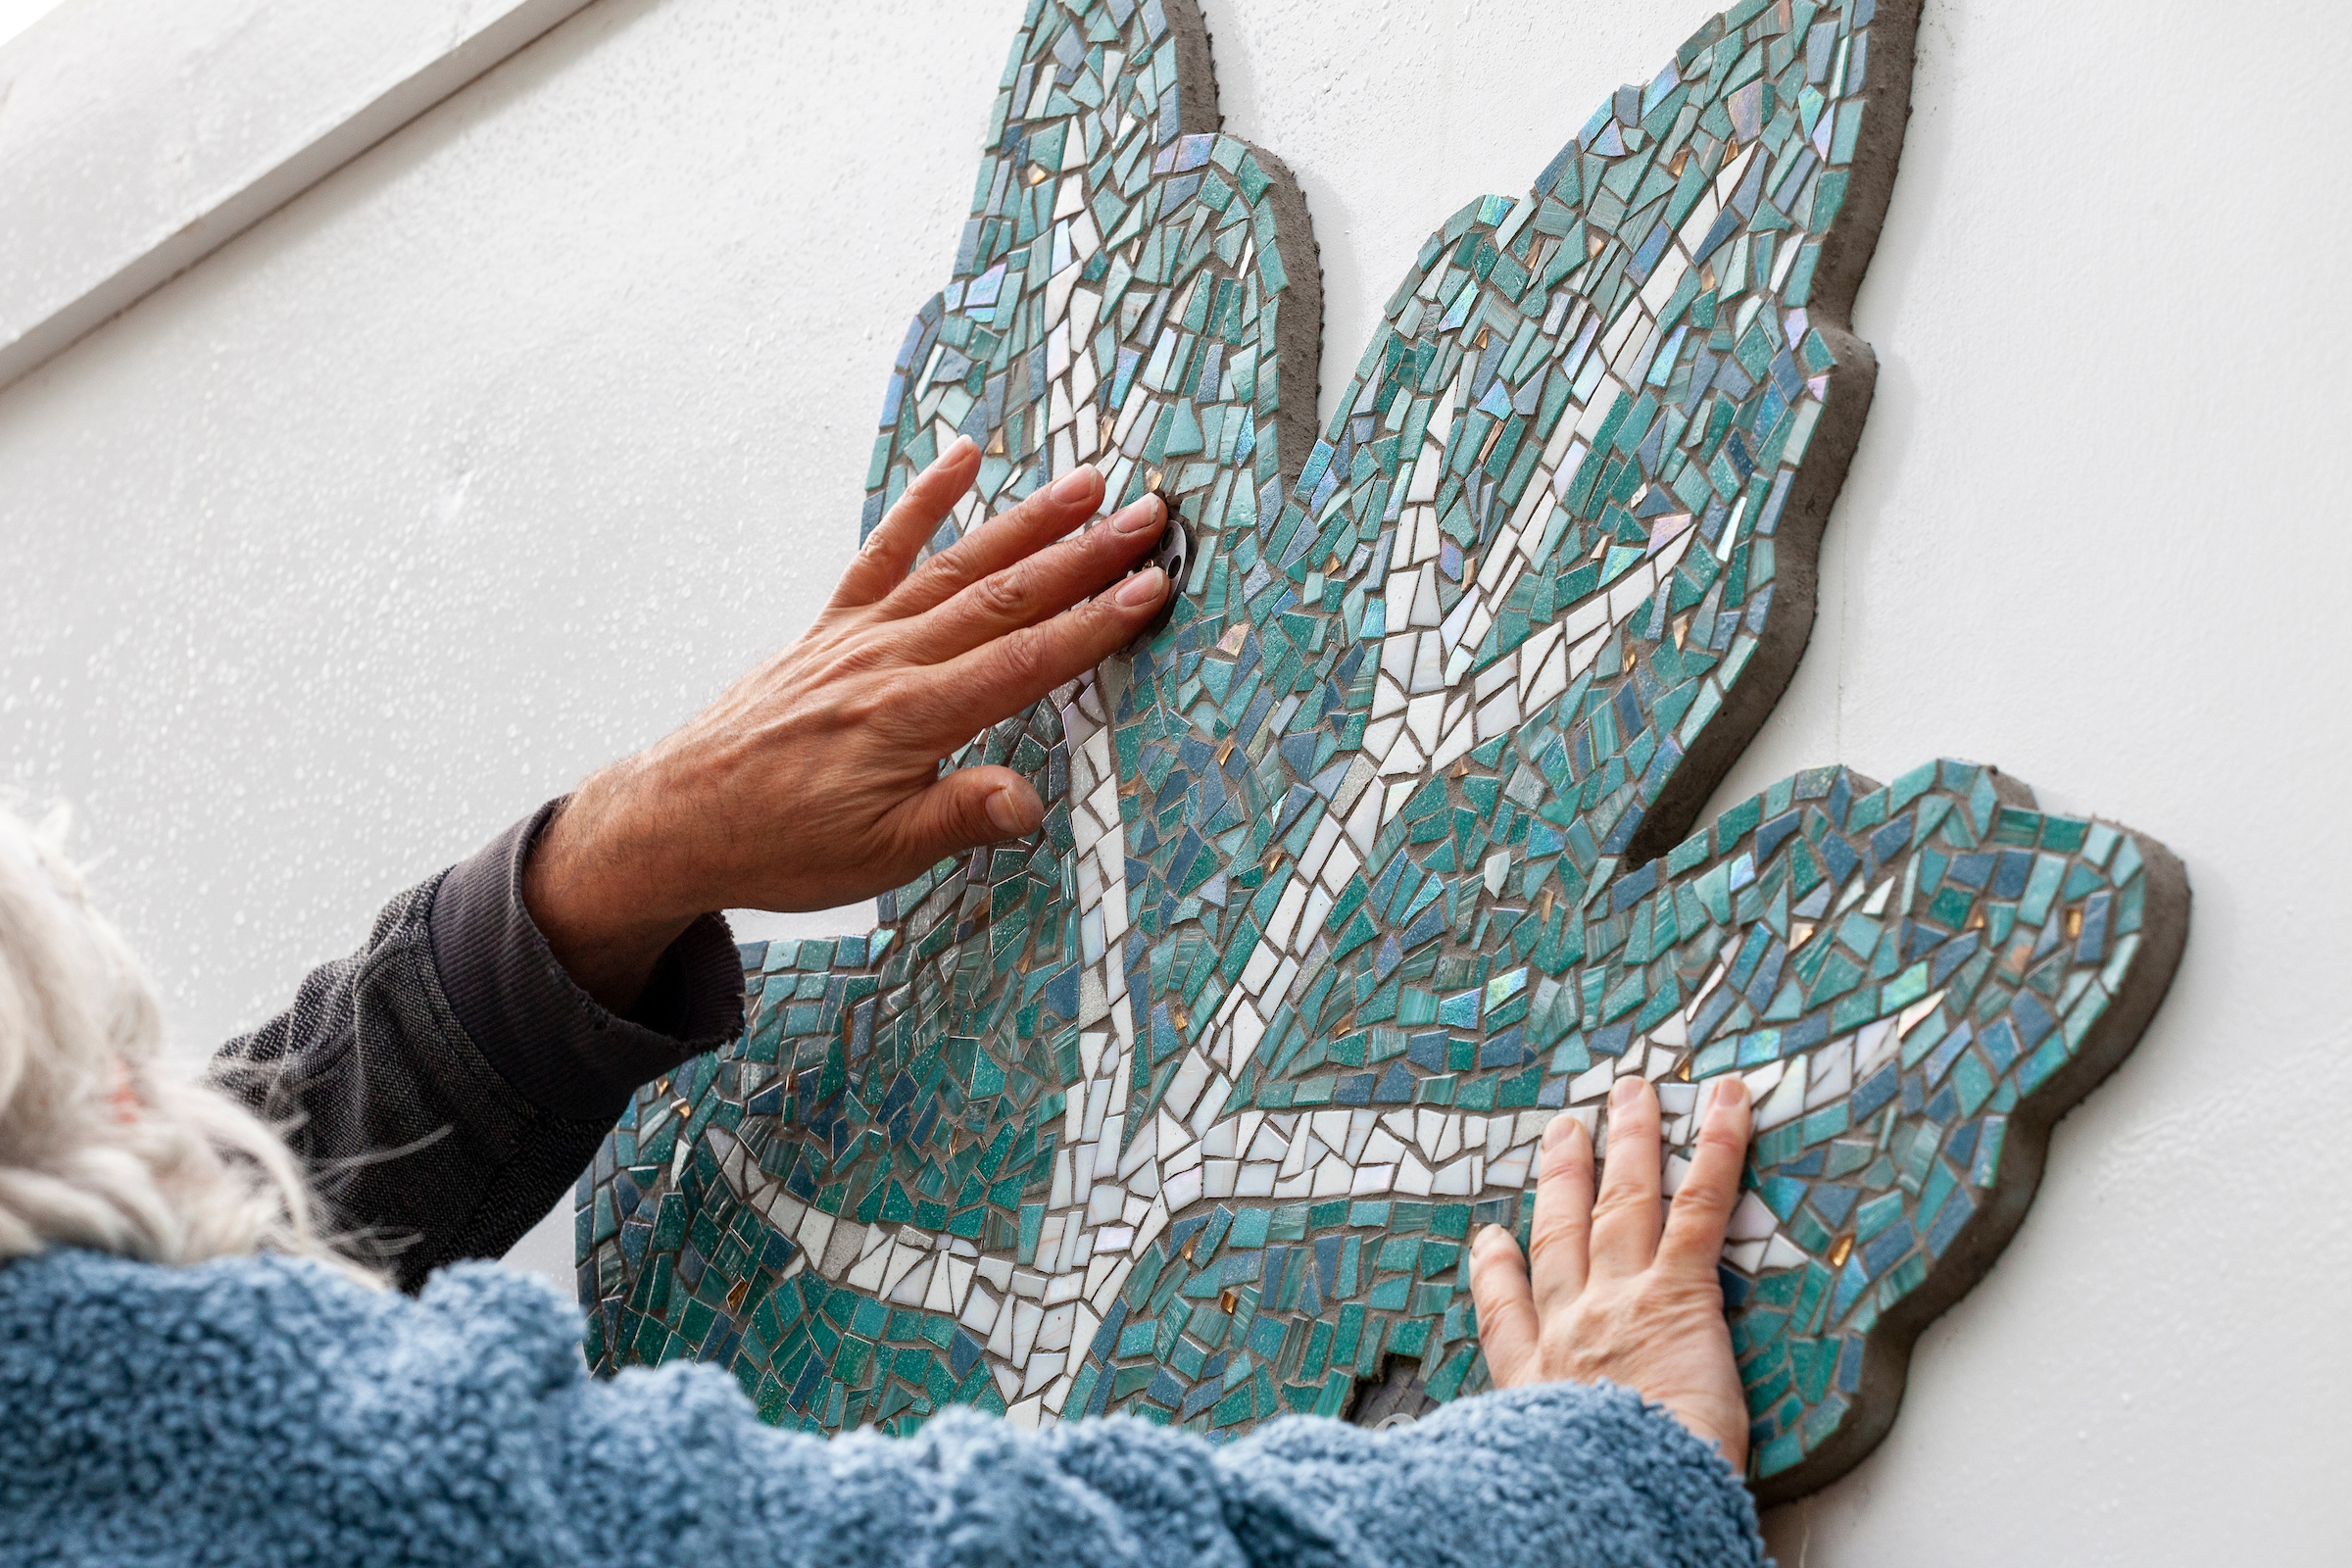 Closeup of two people's hands touching a leaf-shaped mosaic fixed to a white wall, outdoors.